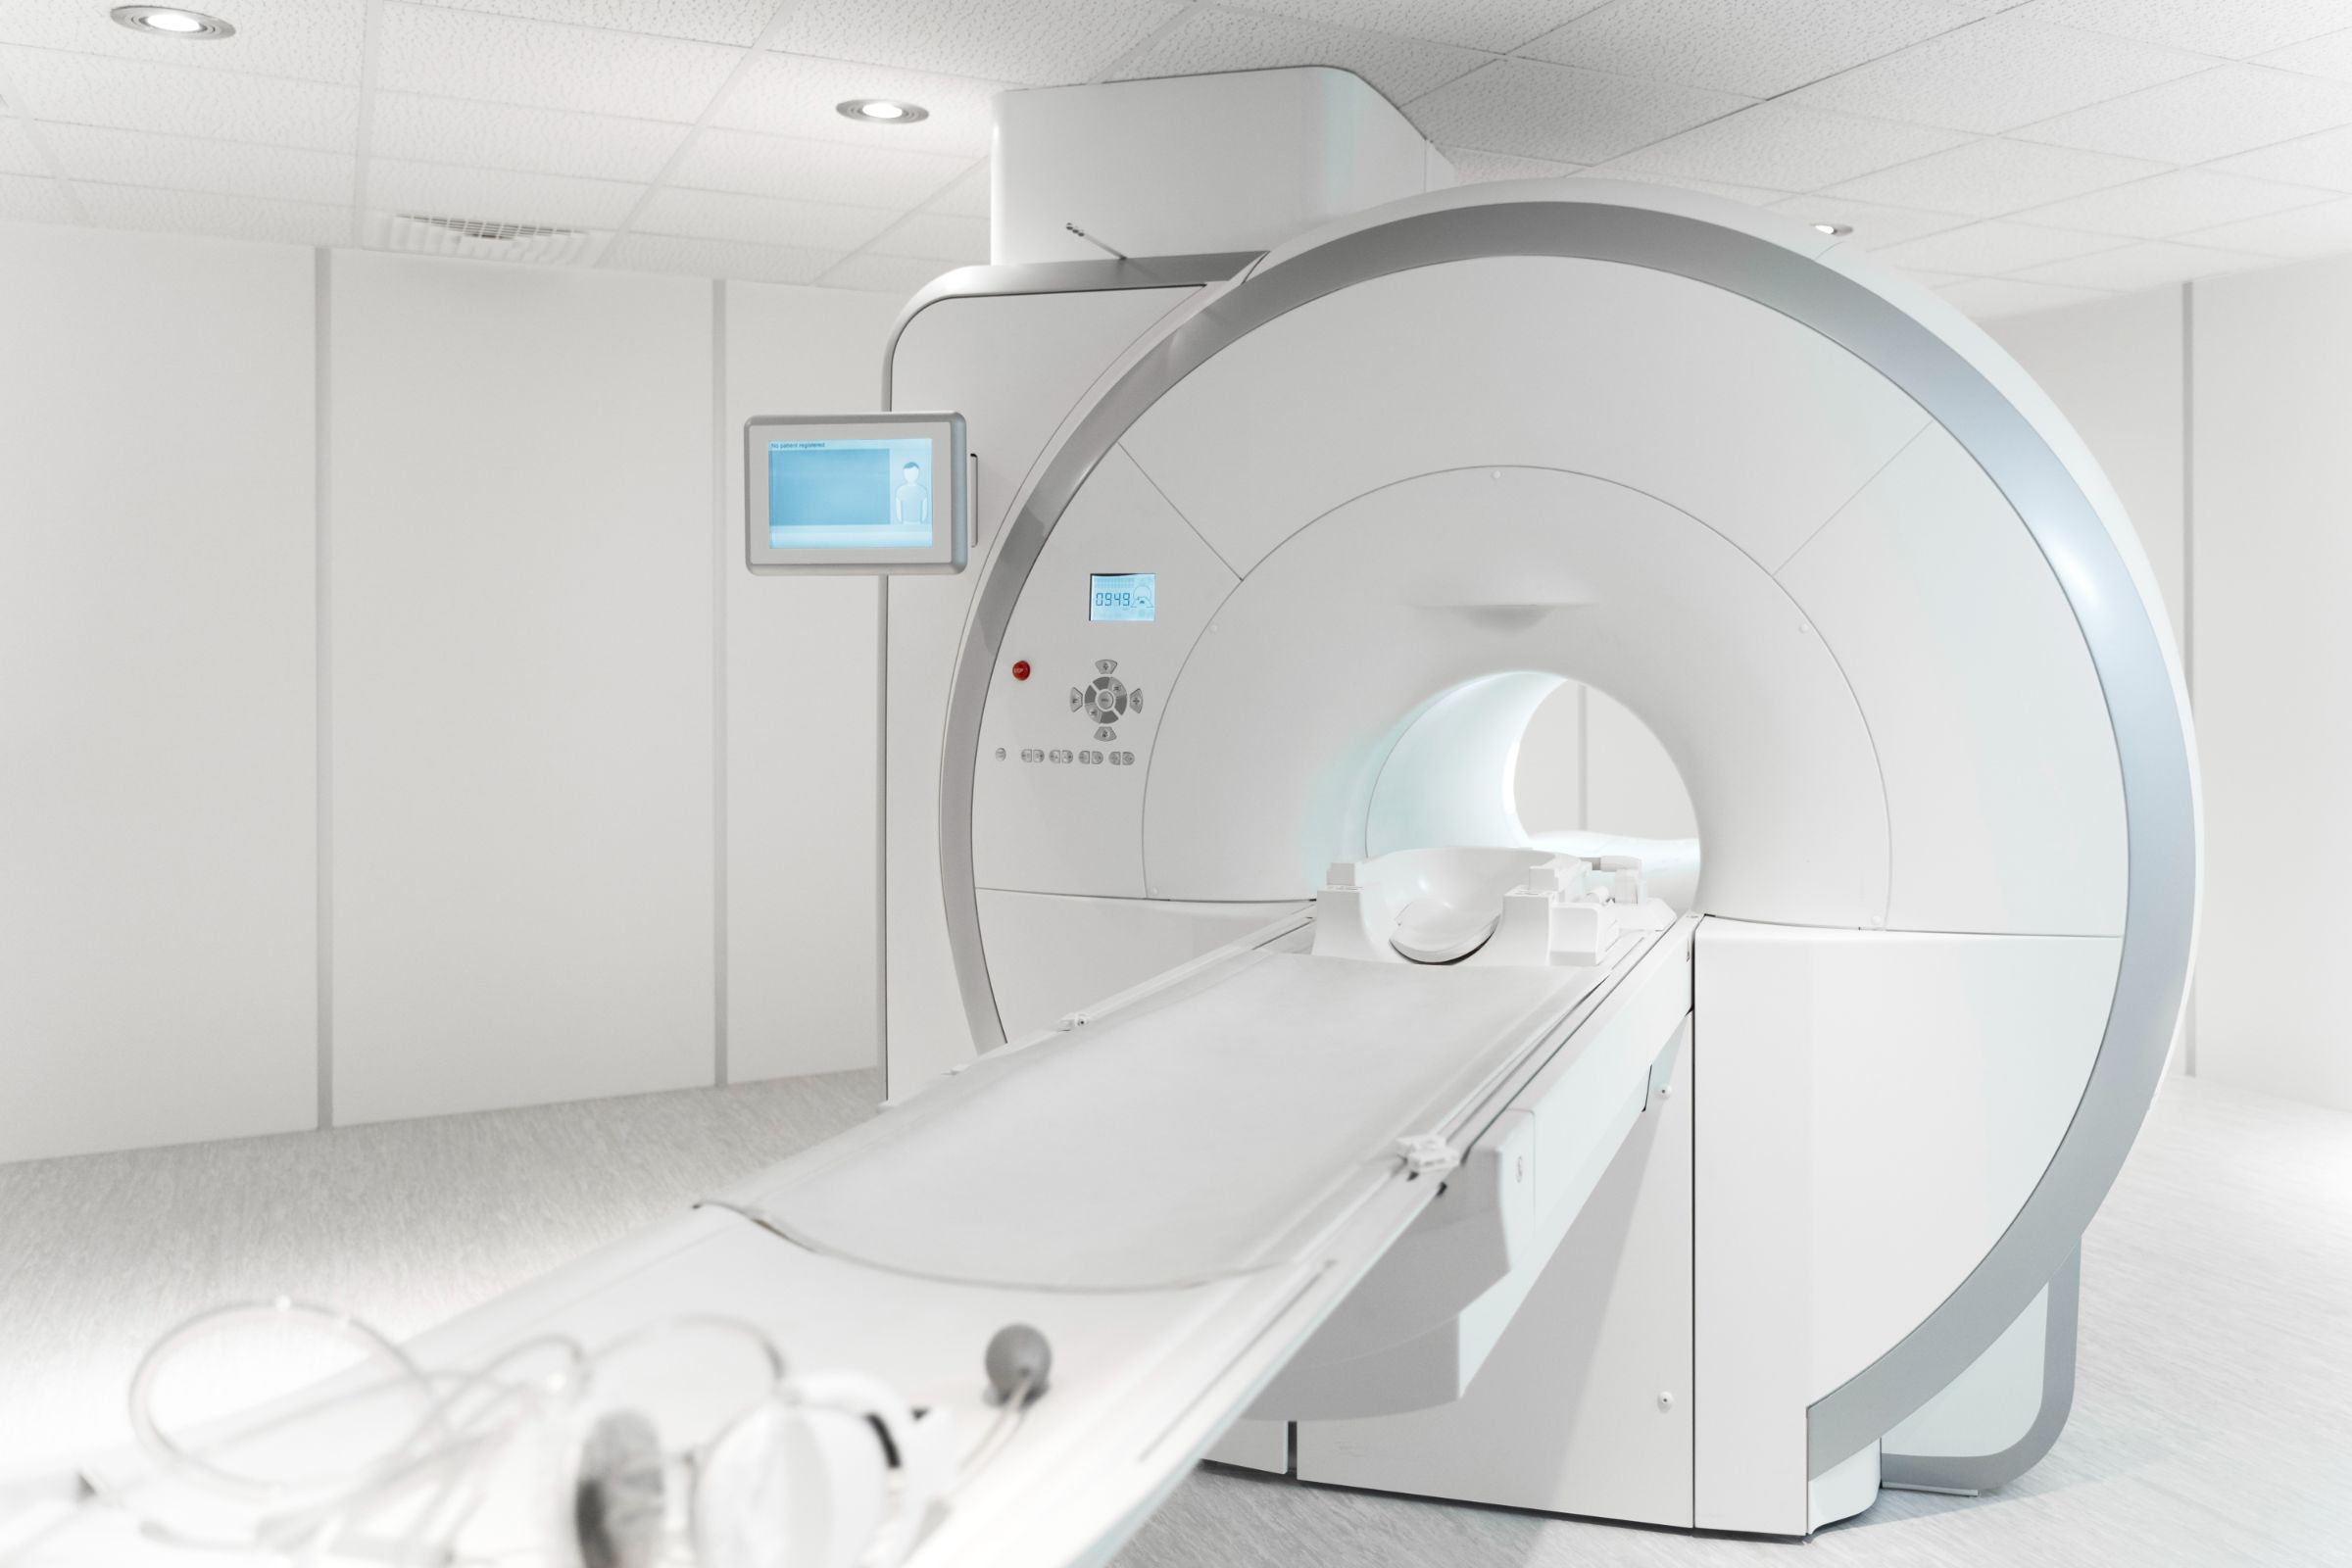 Why Servicing Imaging Equipment Is an Essential Part of Patient Care